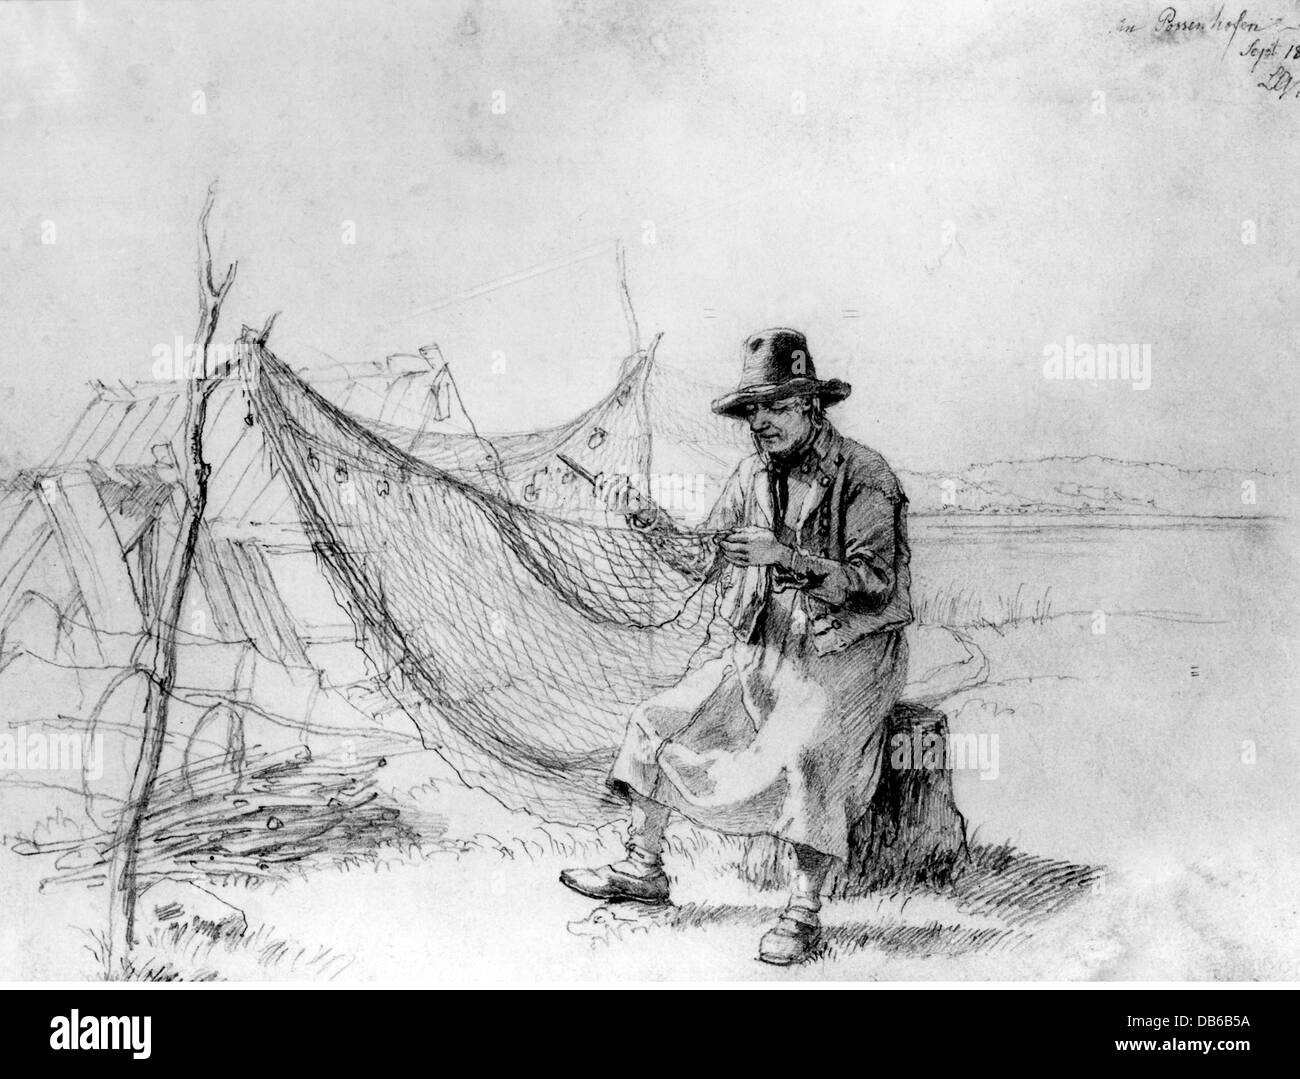 fishing, fisherman mending a net, drawing by Lorenz Quaglio the Younger, Possenhofen, Upper Bavaria, Germany, September 1852, Additional-Rights-Clearences-Not Available Stock Photo